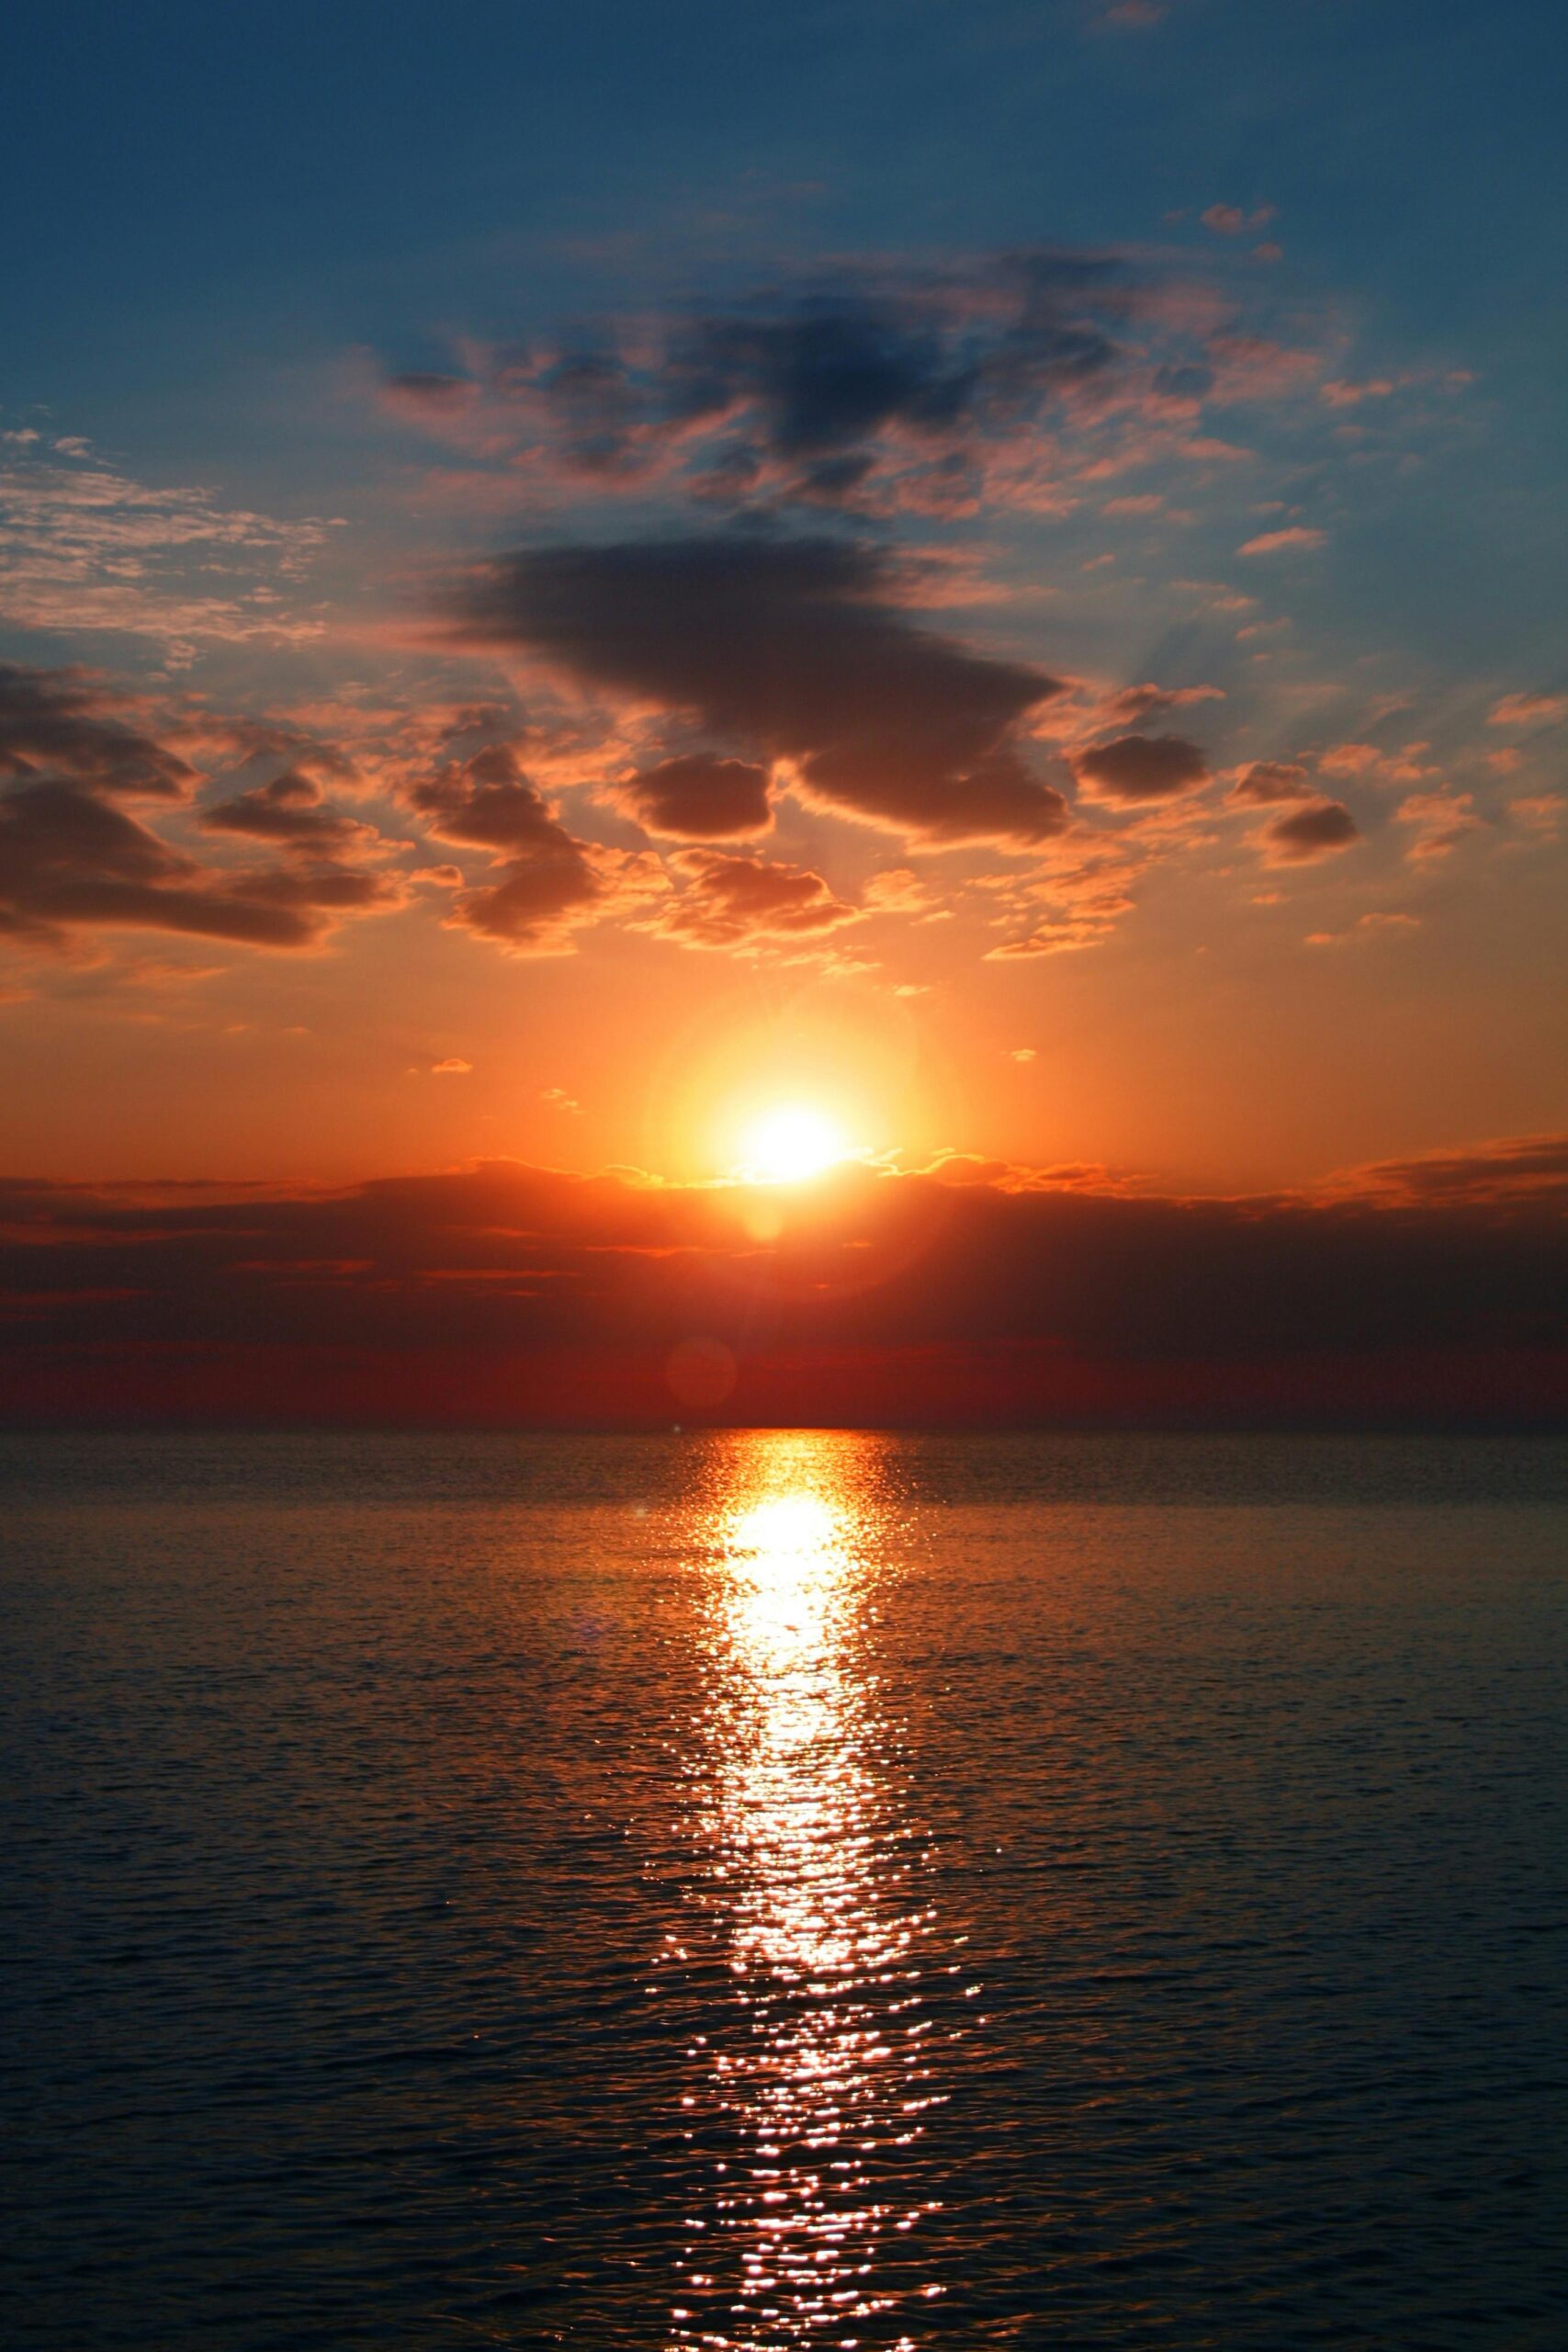 Image of a sunset.